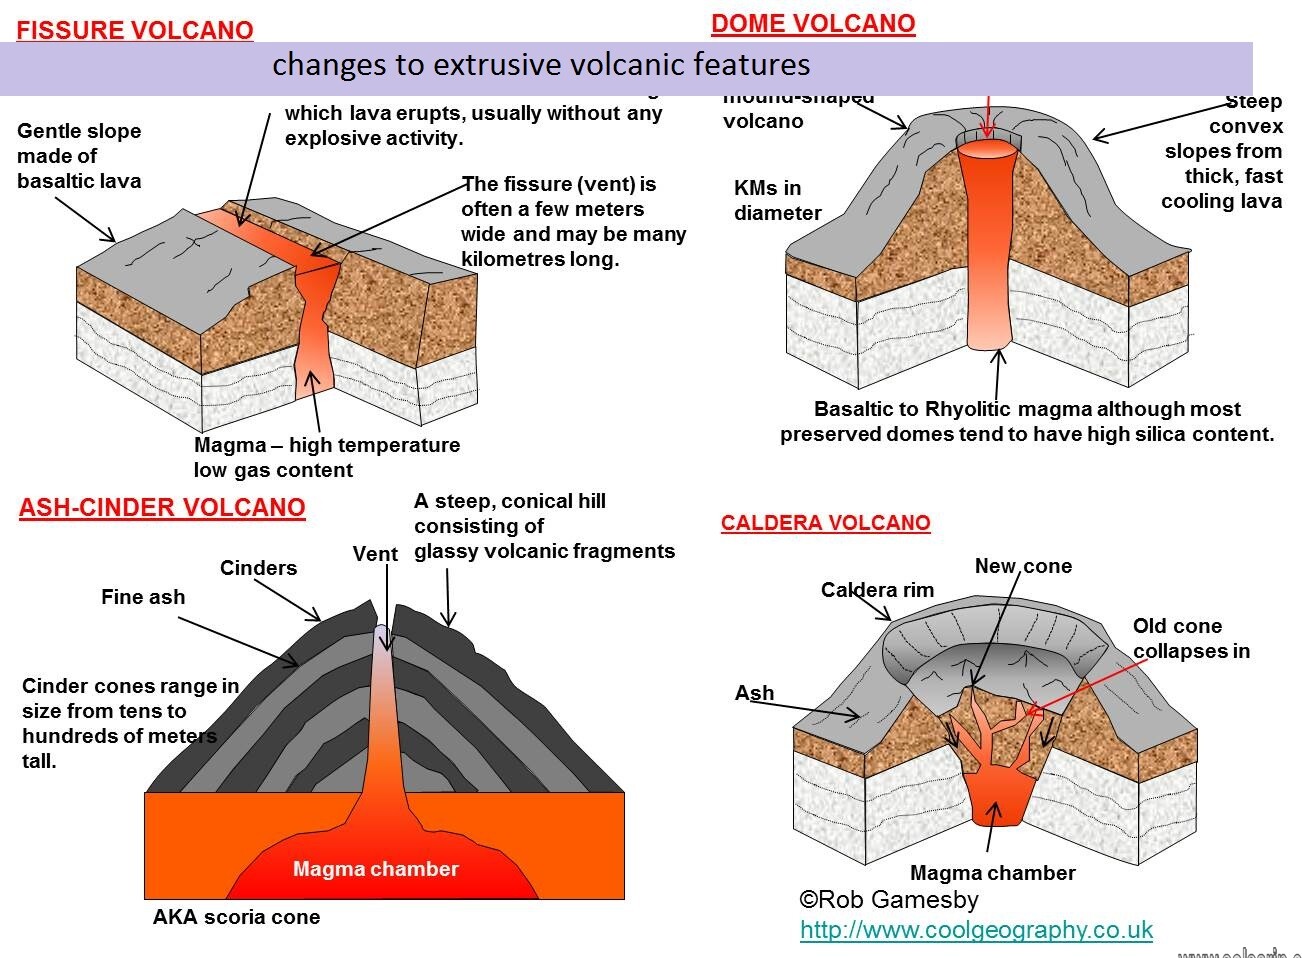 changes to extrusive volcanic features